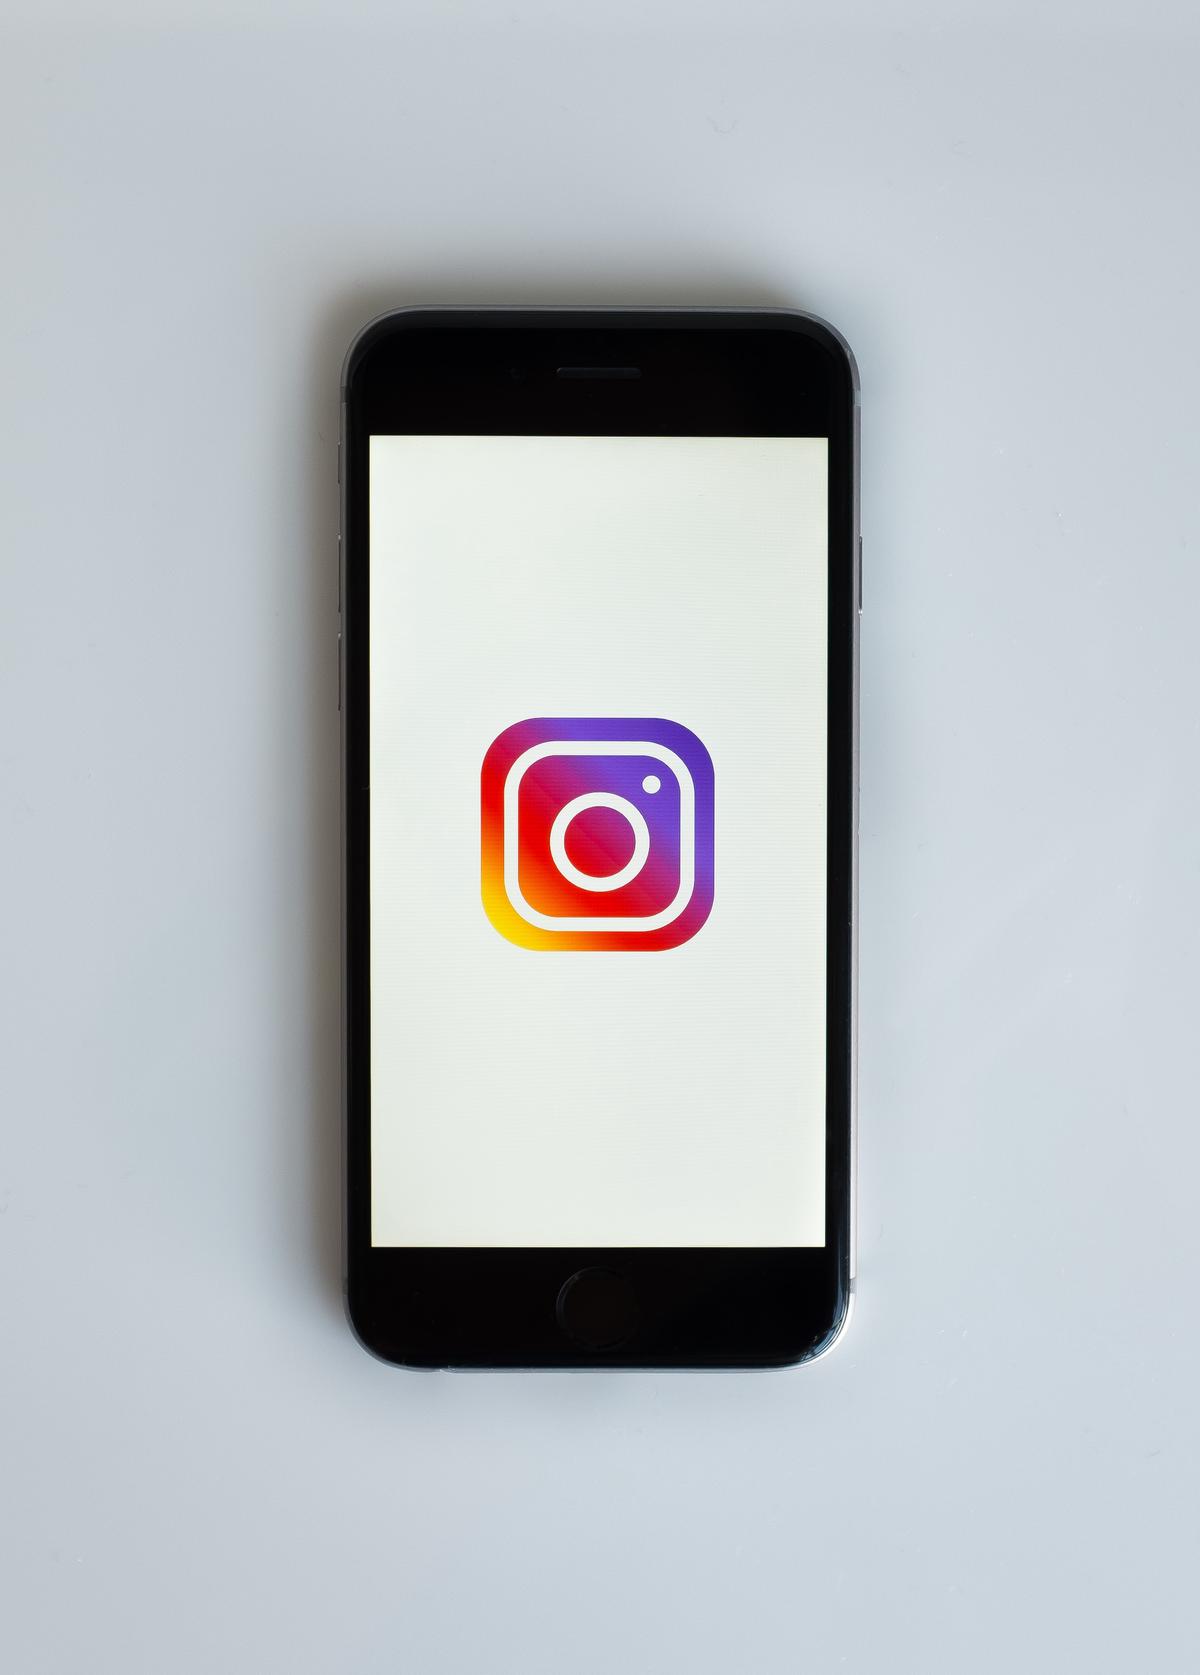 A person holding a smartphone with the Instagram logo displayed on the screen, representing earning money from Instagram